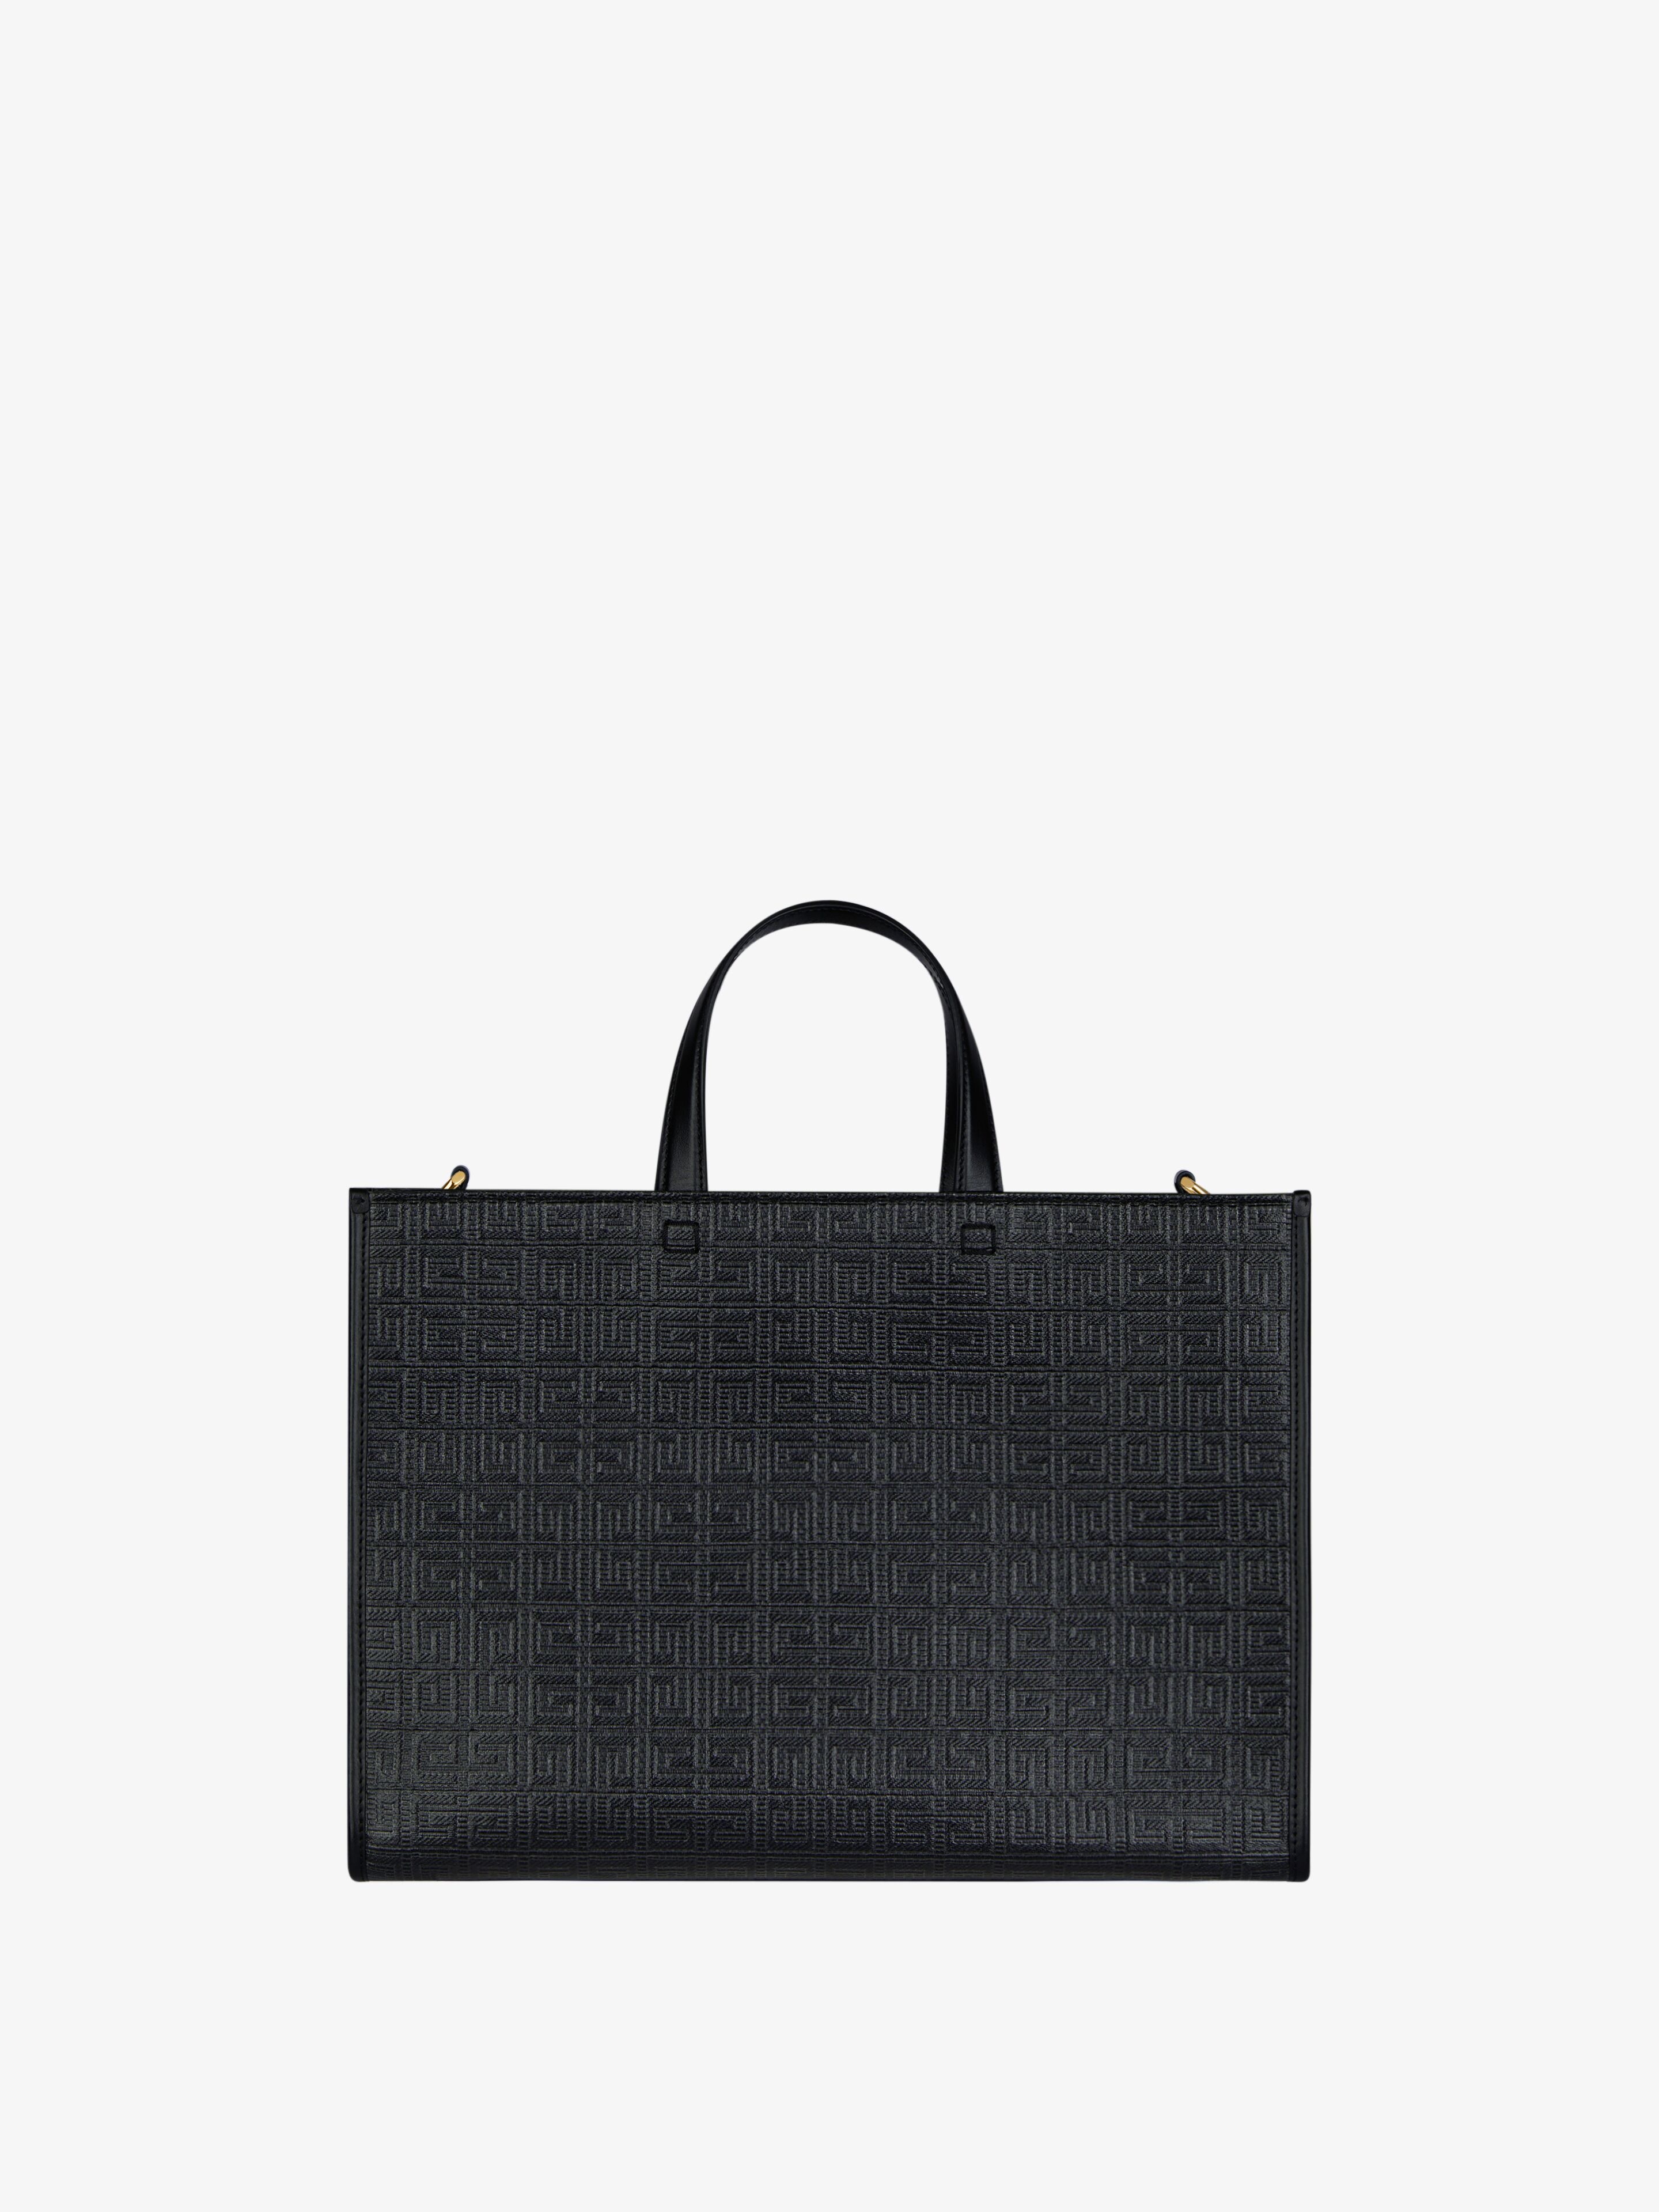 G medium leather-trimmed embossed coated-canvas tote